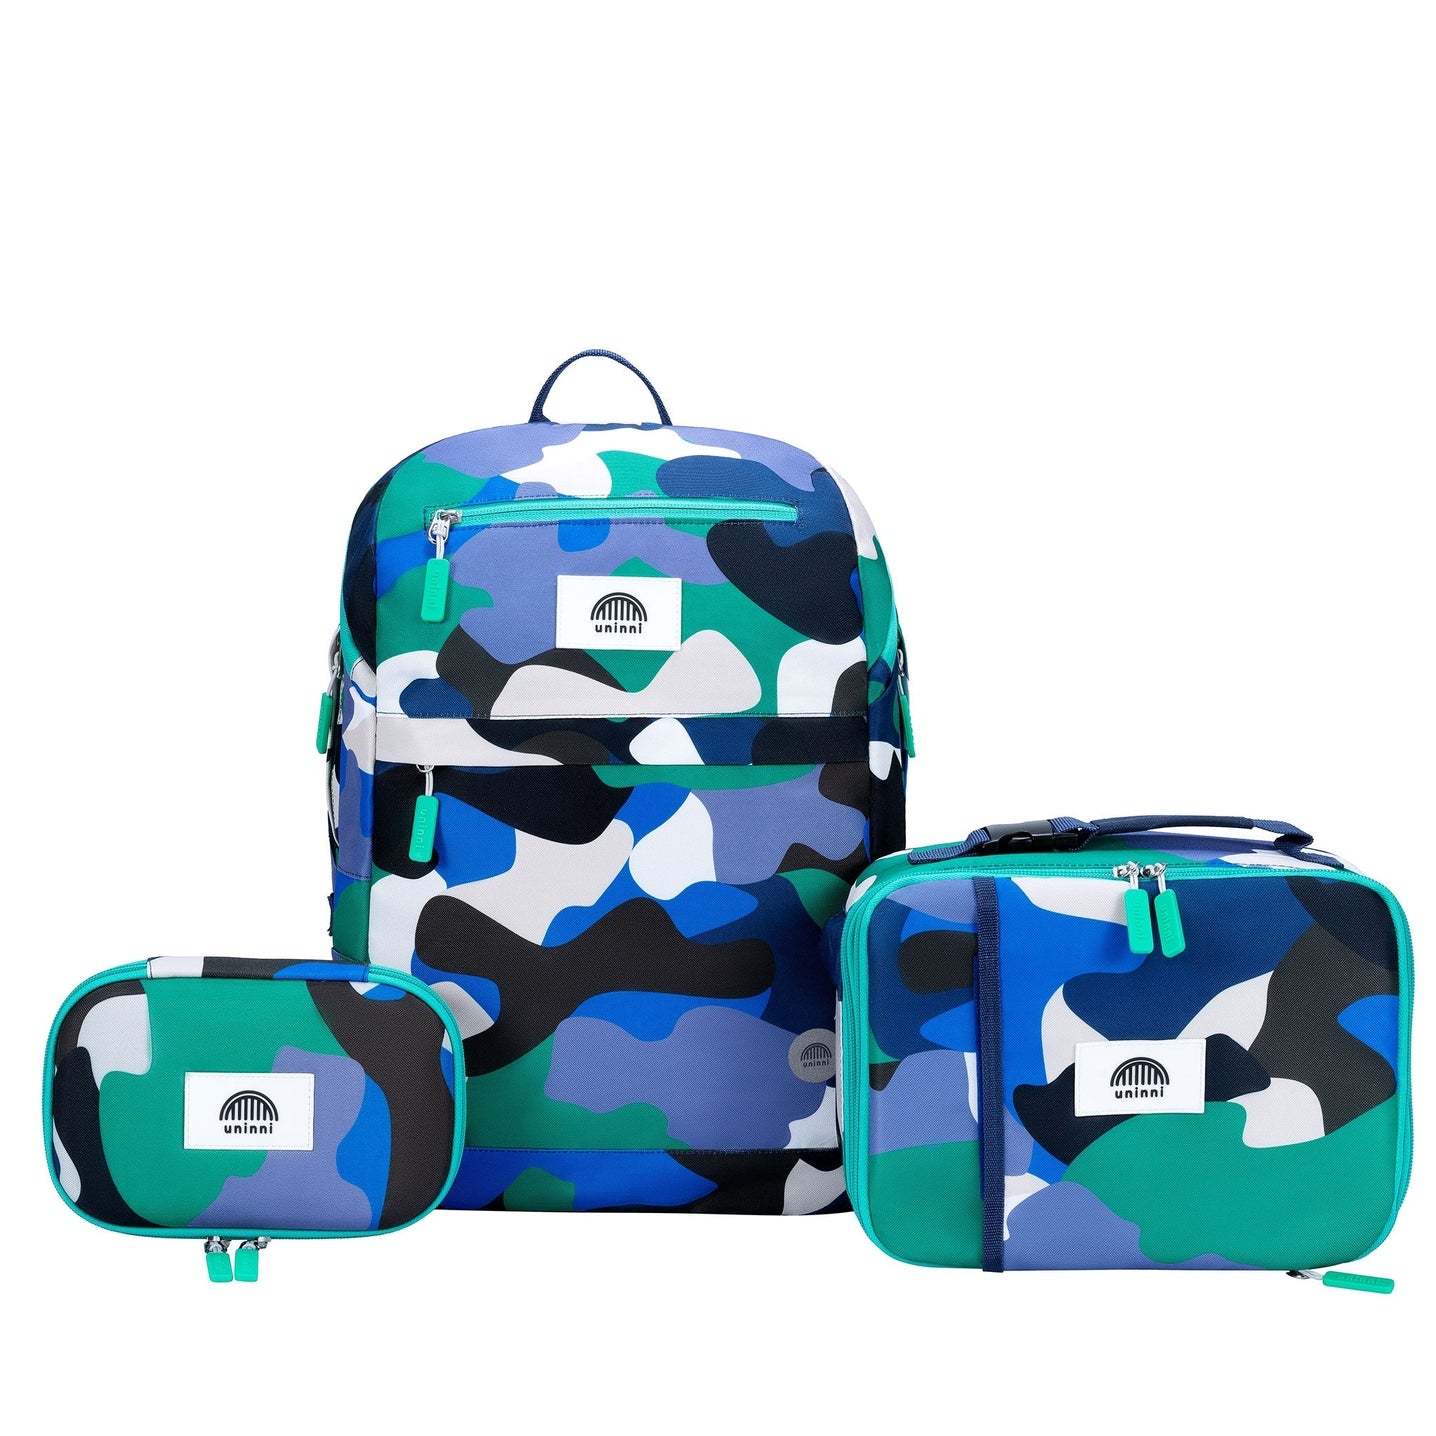 Matching Backpack, Lunch Tote, & Pencil Case by Uninni - Camo